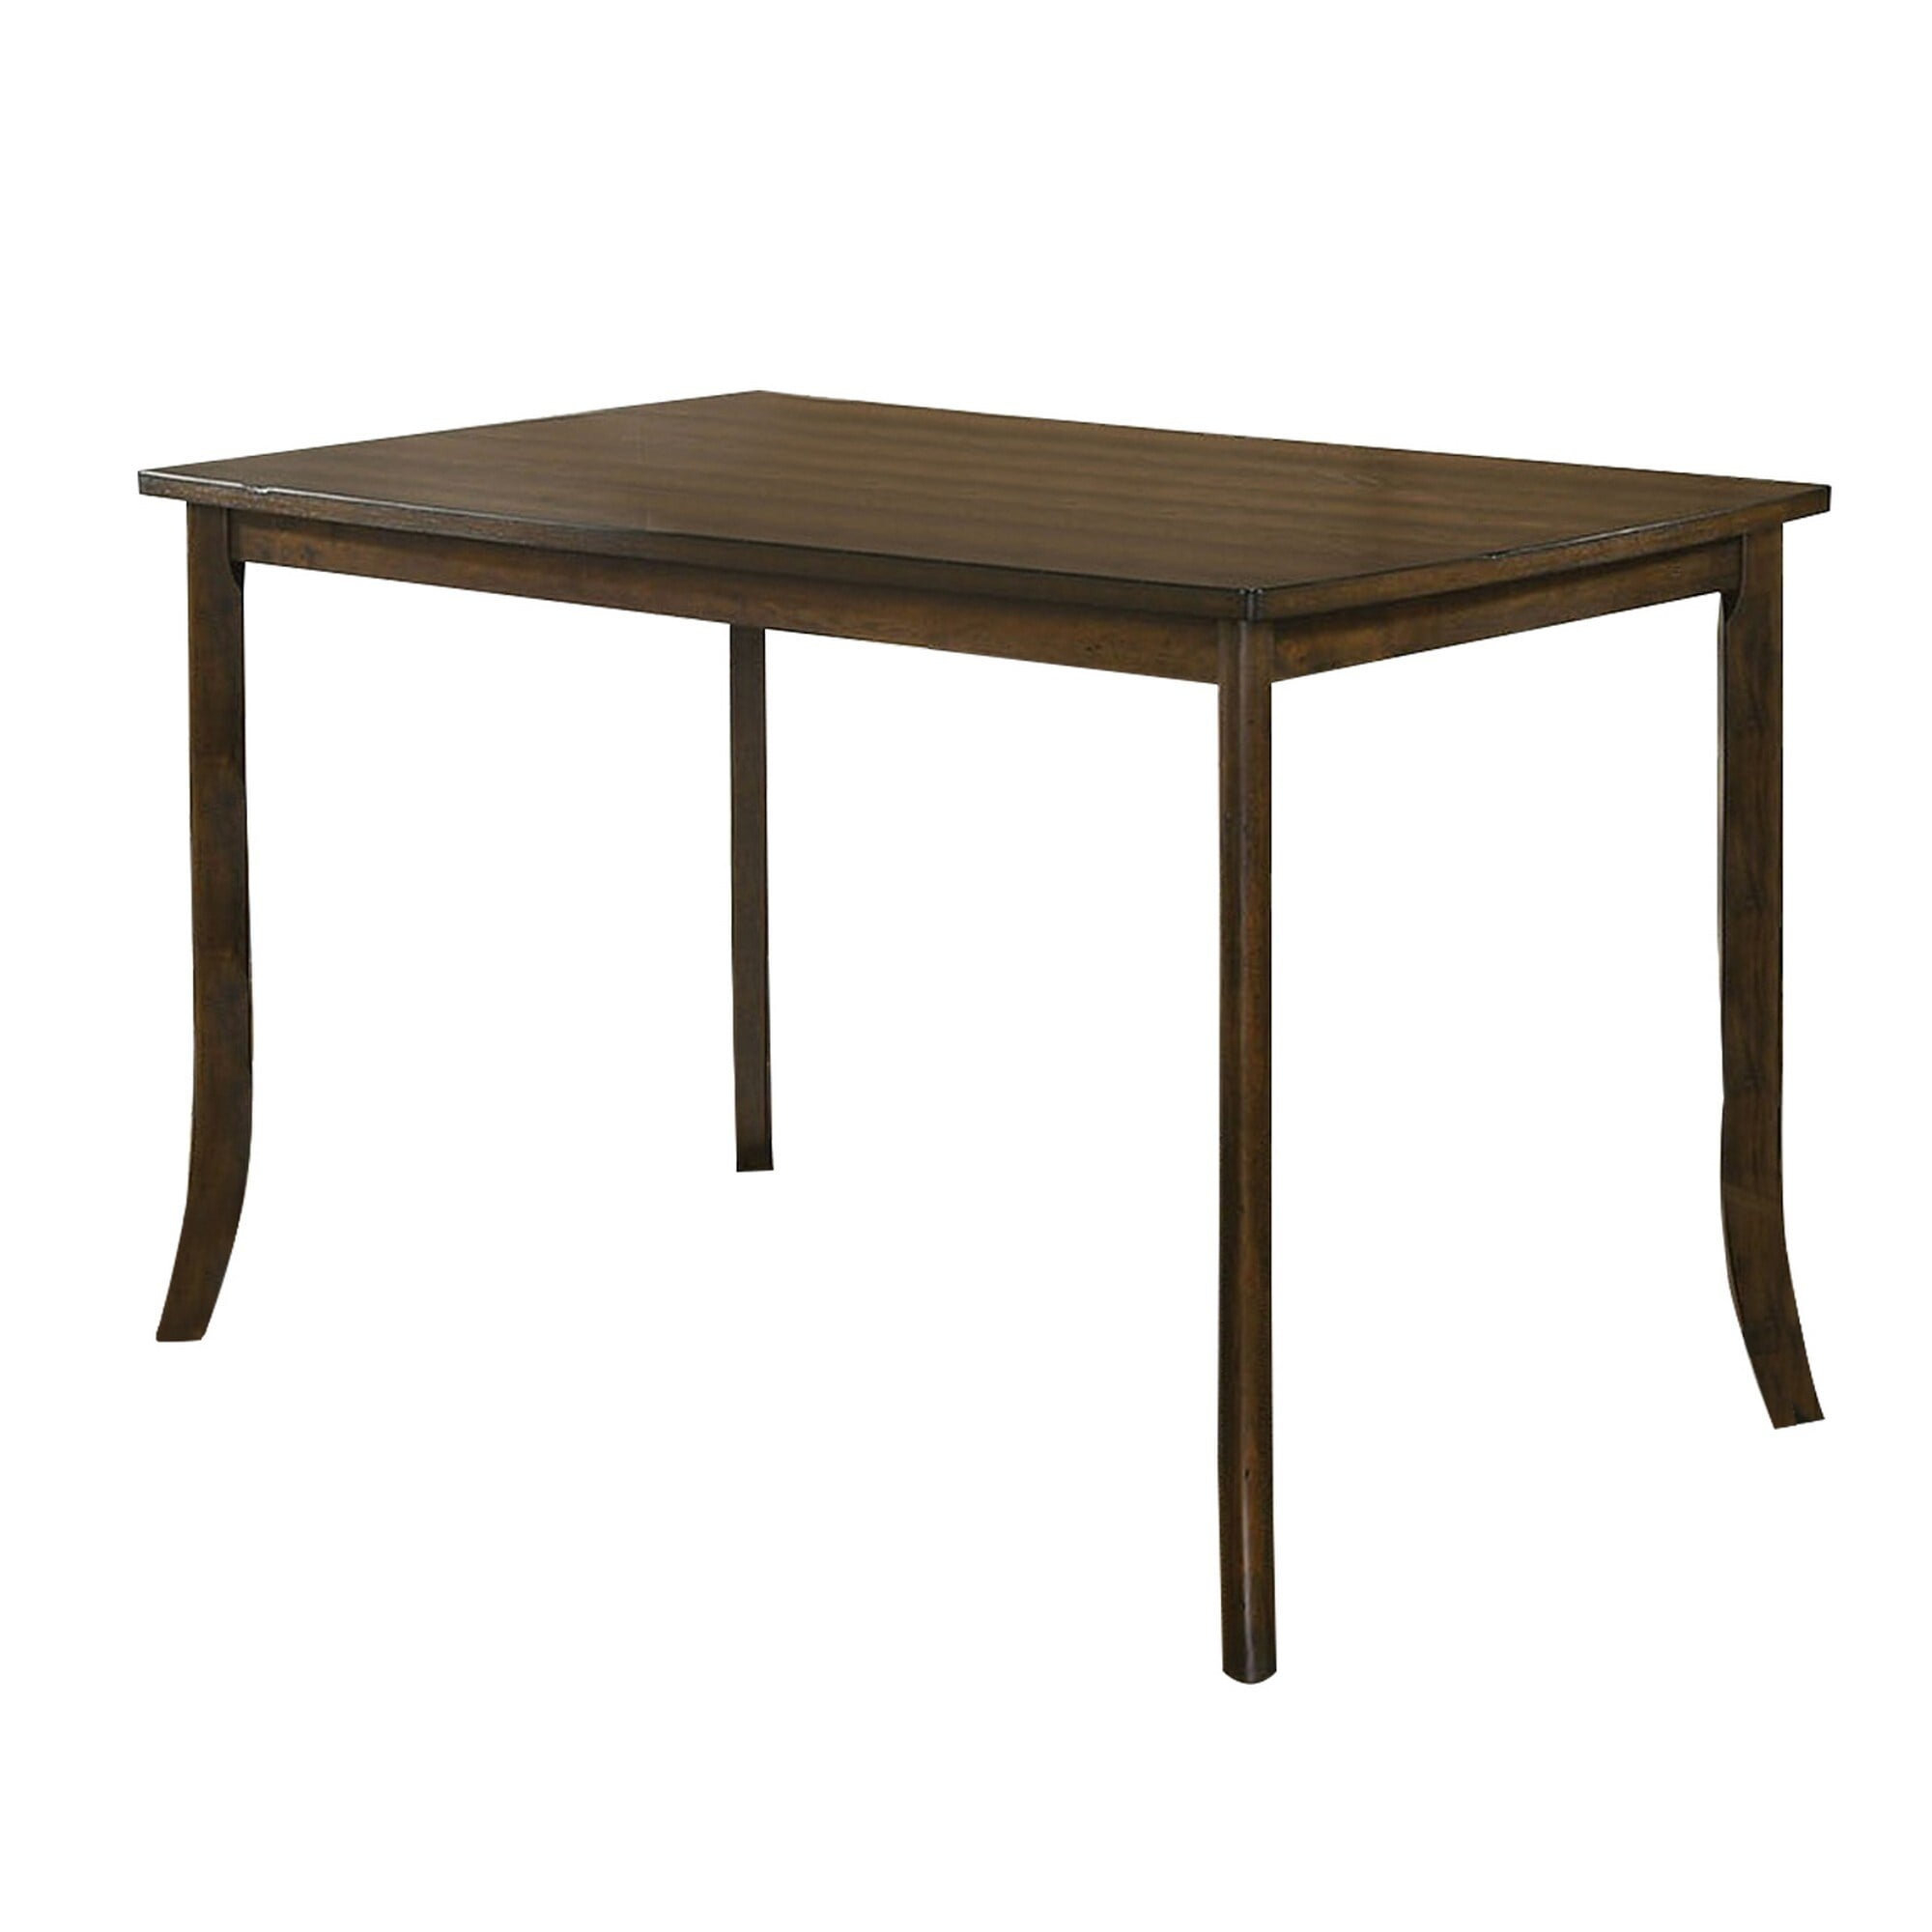 Picture of Benjara BM230597 Rectangular Wooden Top Counter Height Table with Saber Legs, Brown